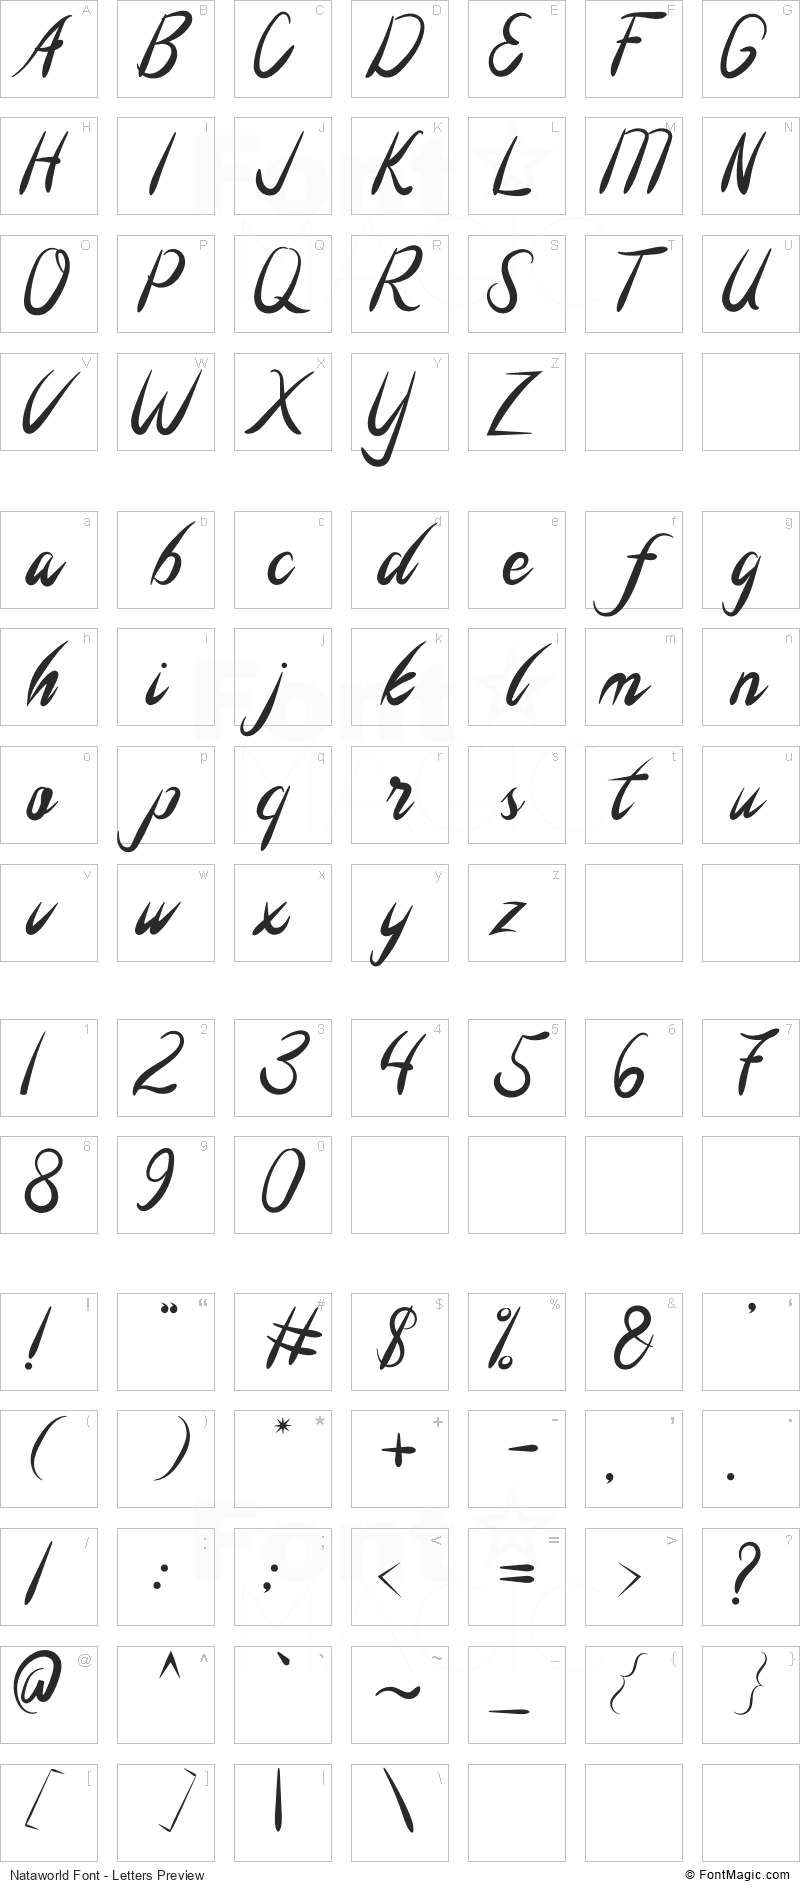 Nataworld Font - All Latters Preview Chart